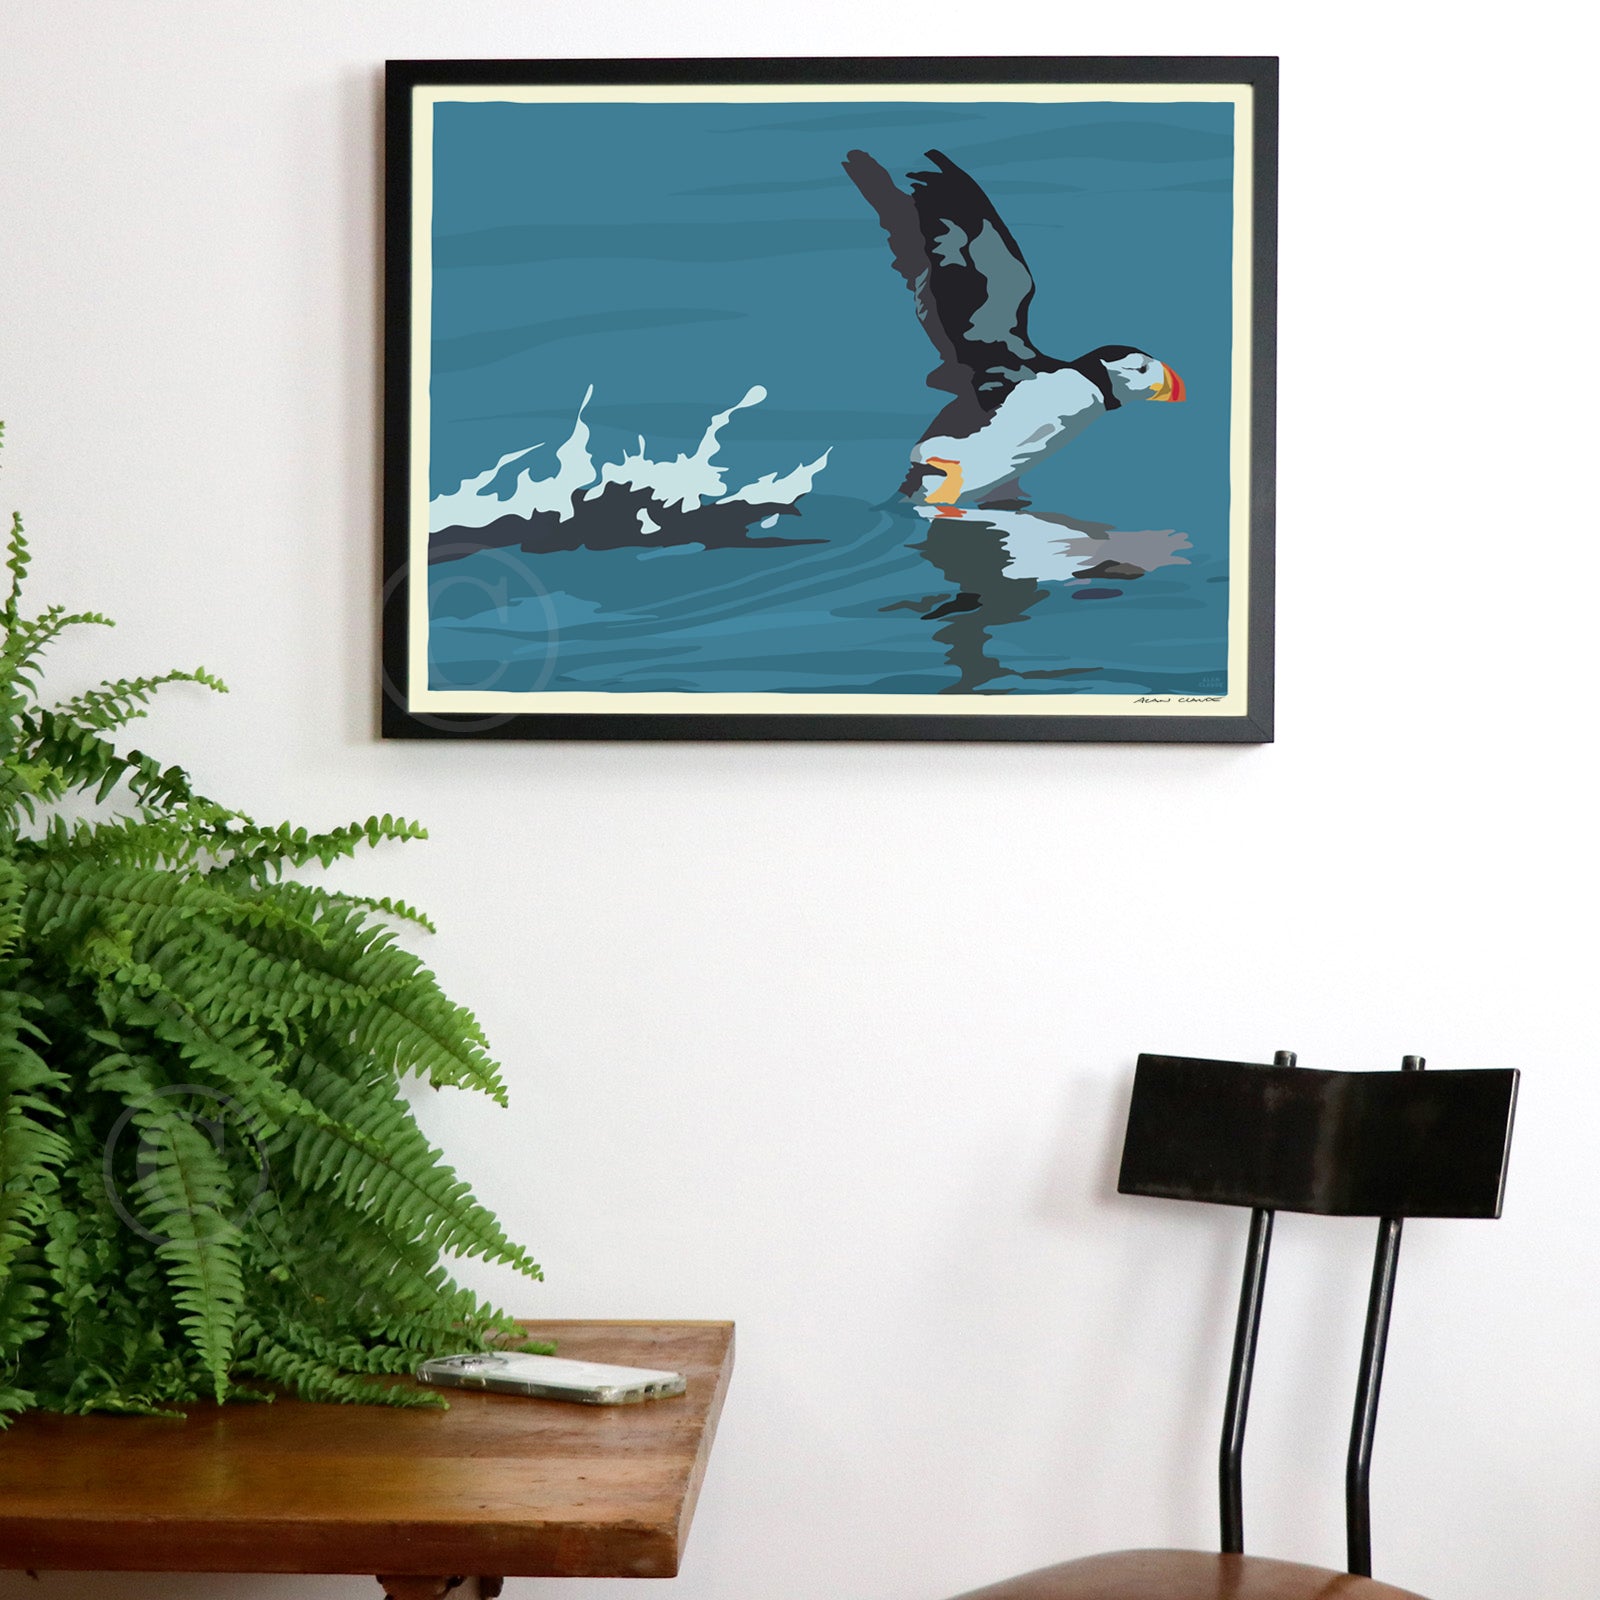 Puffin Takes Flight Art Print 18" x 24" Framed Wall Poster - Maine